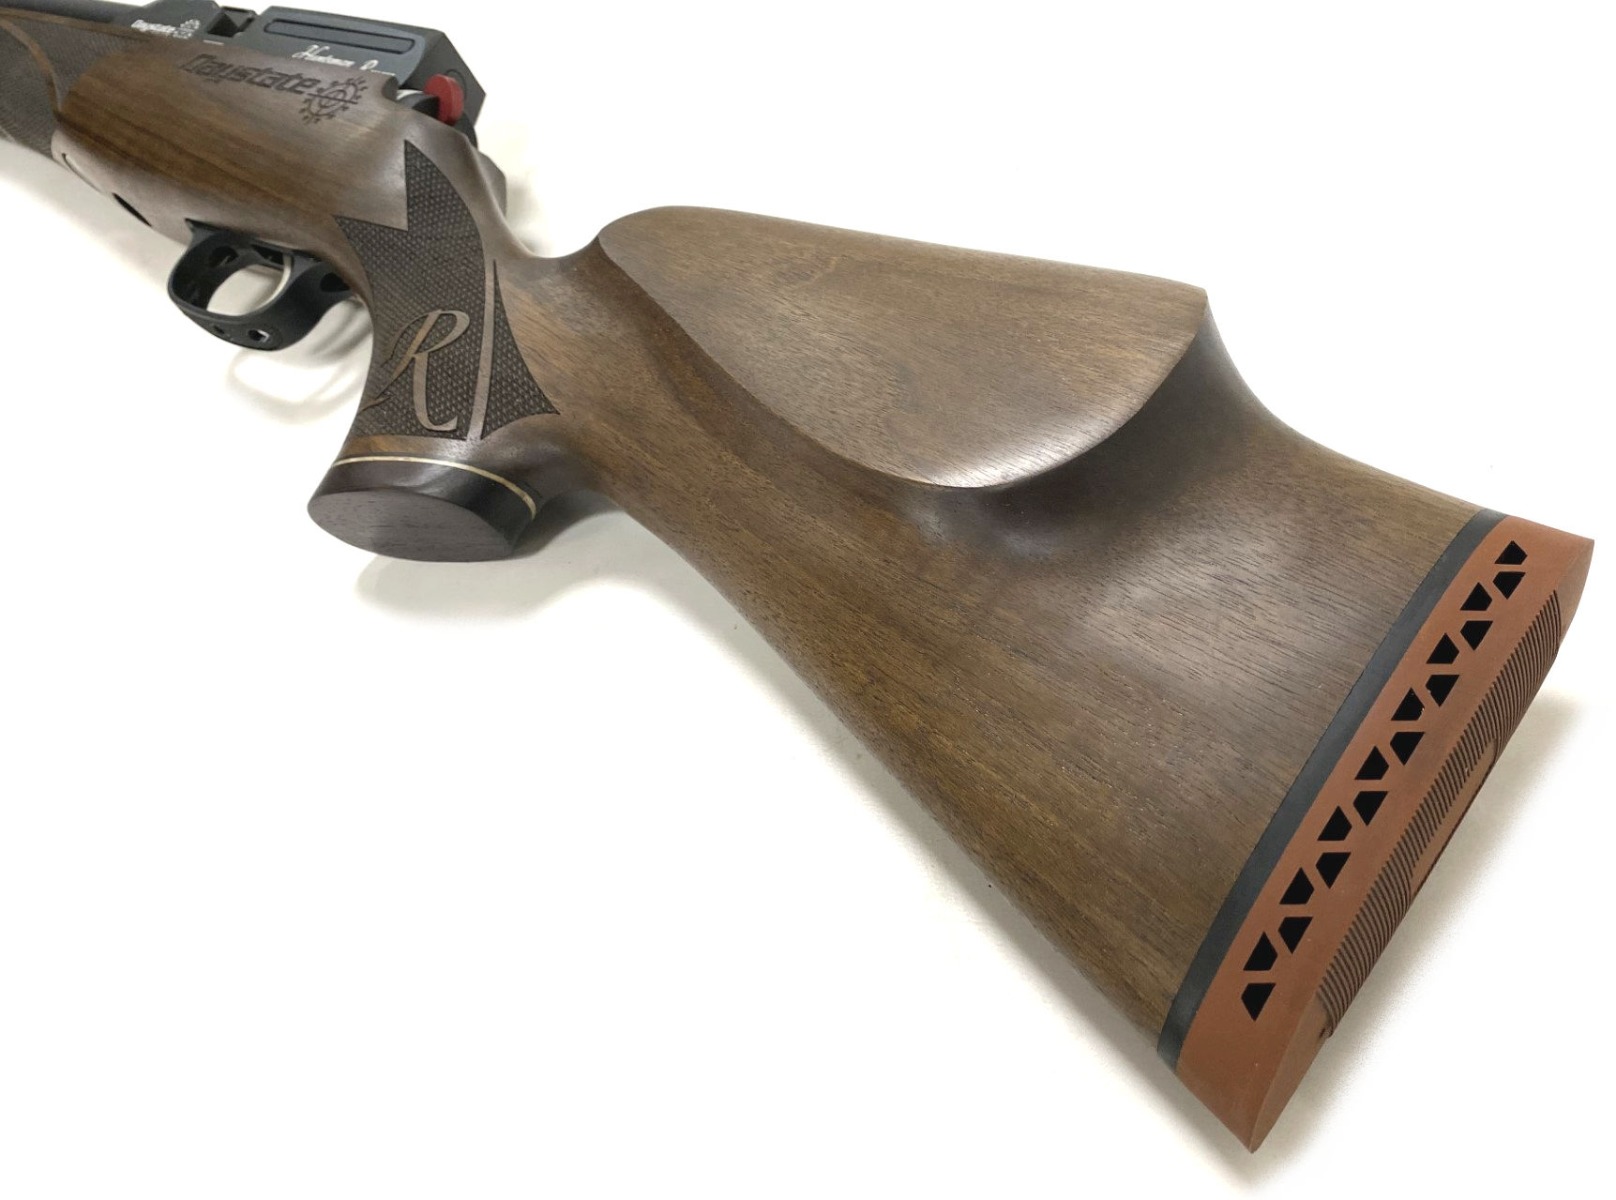 Daystate Huntsman Revere .22 Pre-Charged Air Rifle - 230731/005 Image 5